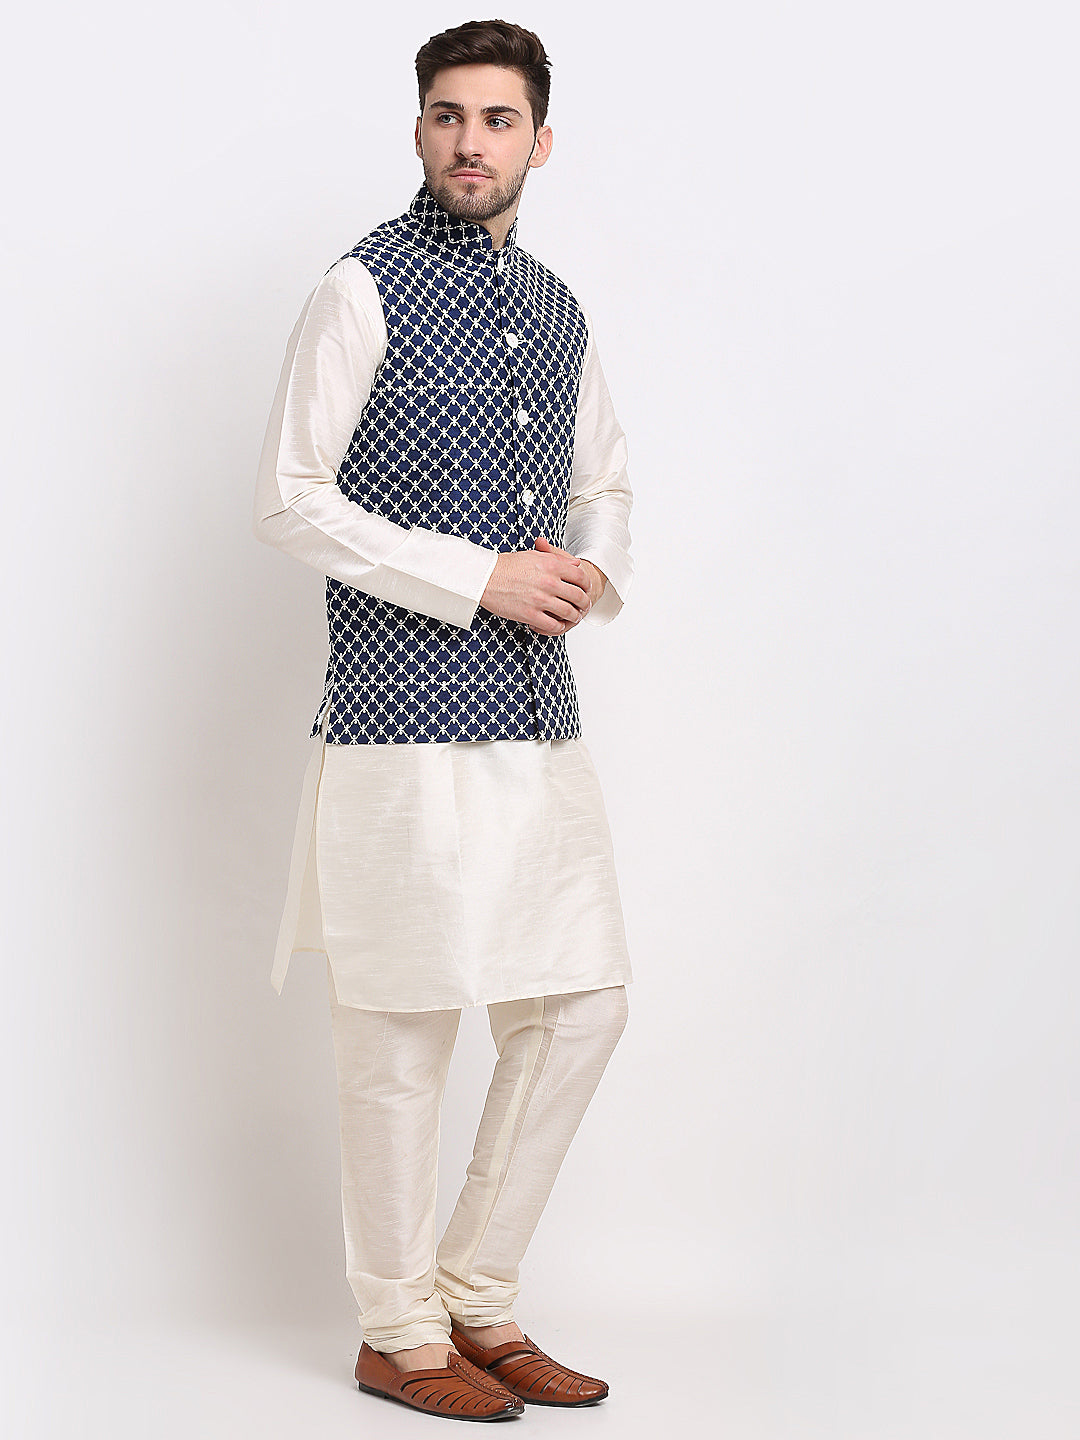 Jompers Men's Navy Blue Navy Blue and White Embroidered Nehru Jacket